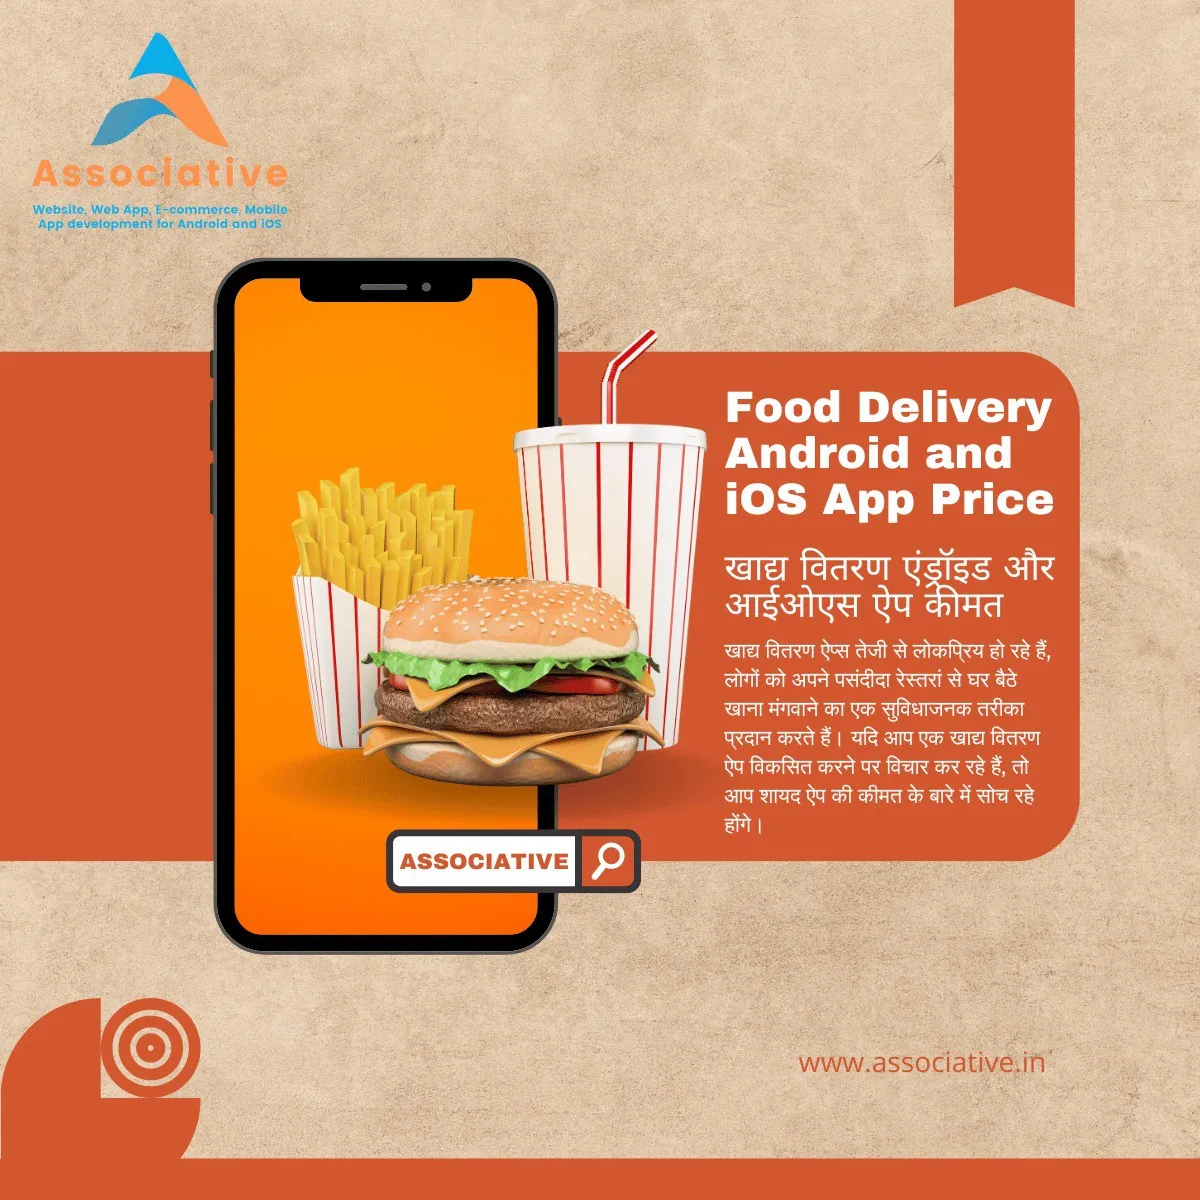 Food Delivery Android and iOS App